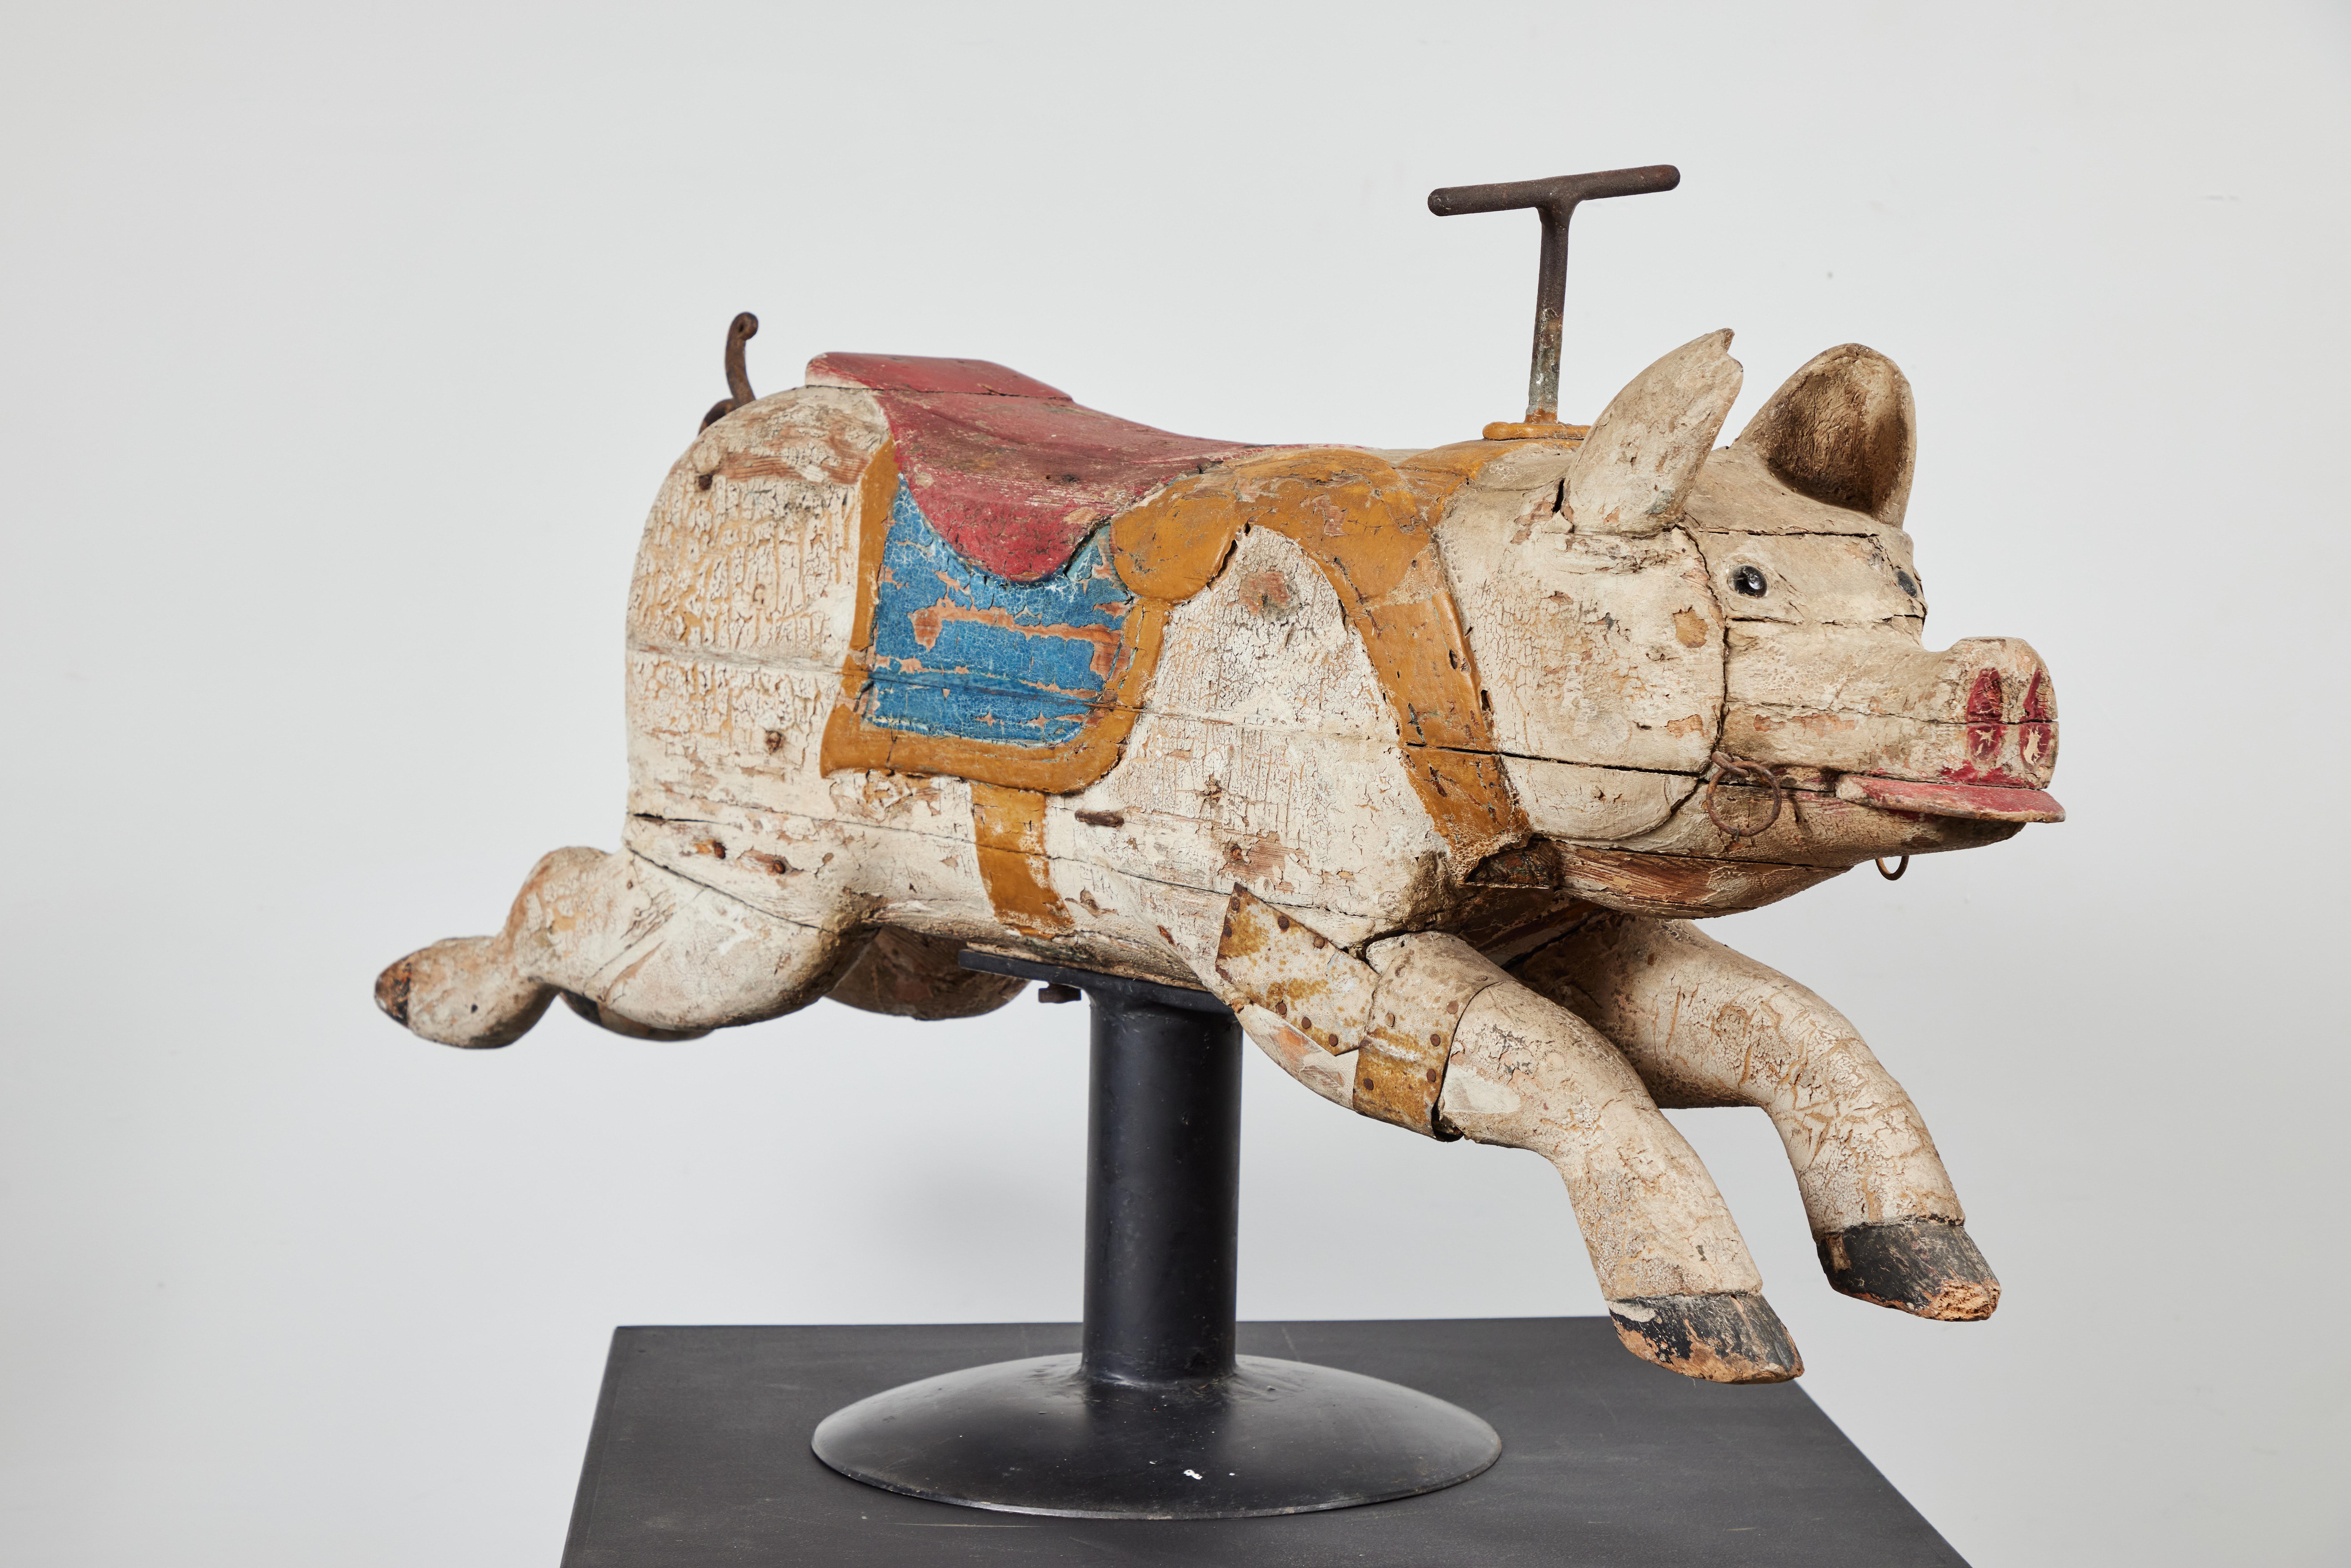 Fantastic 19th century carousel pig. Super whimsical carnival piece from a bygone era. Carved wood with cast iron curly tail and handle. Original layers of park paint and glass eyes. Very old metal strap repair around one leg. Super solid and